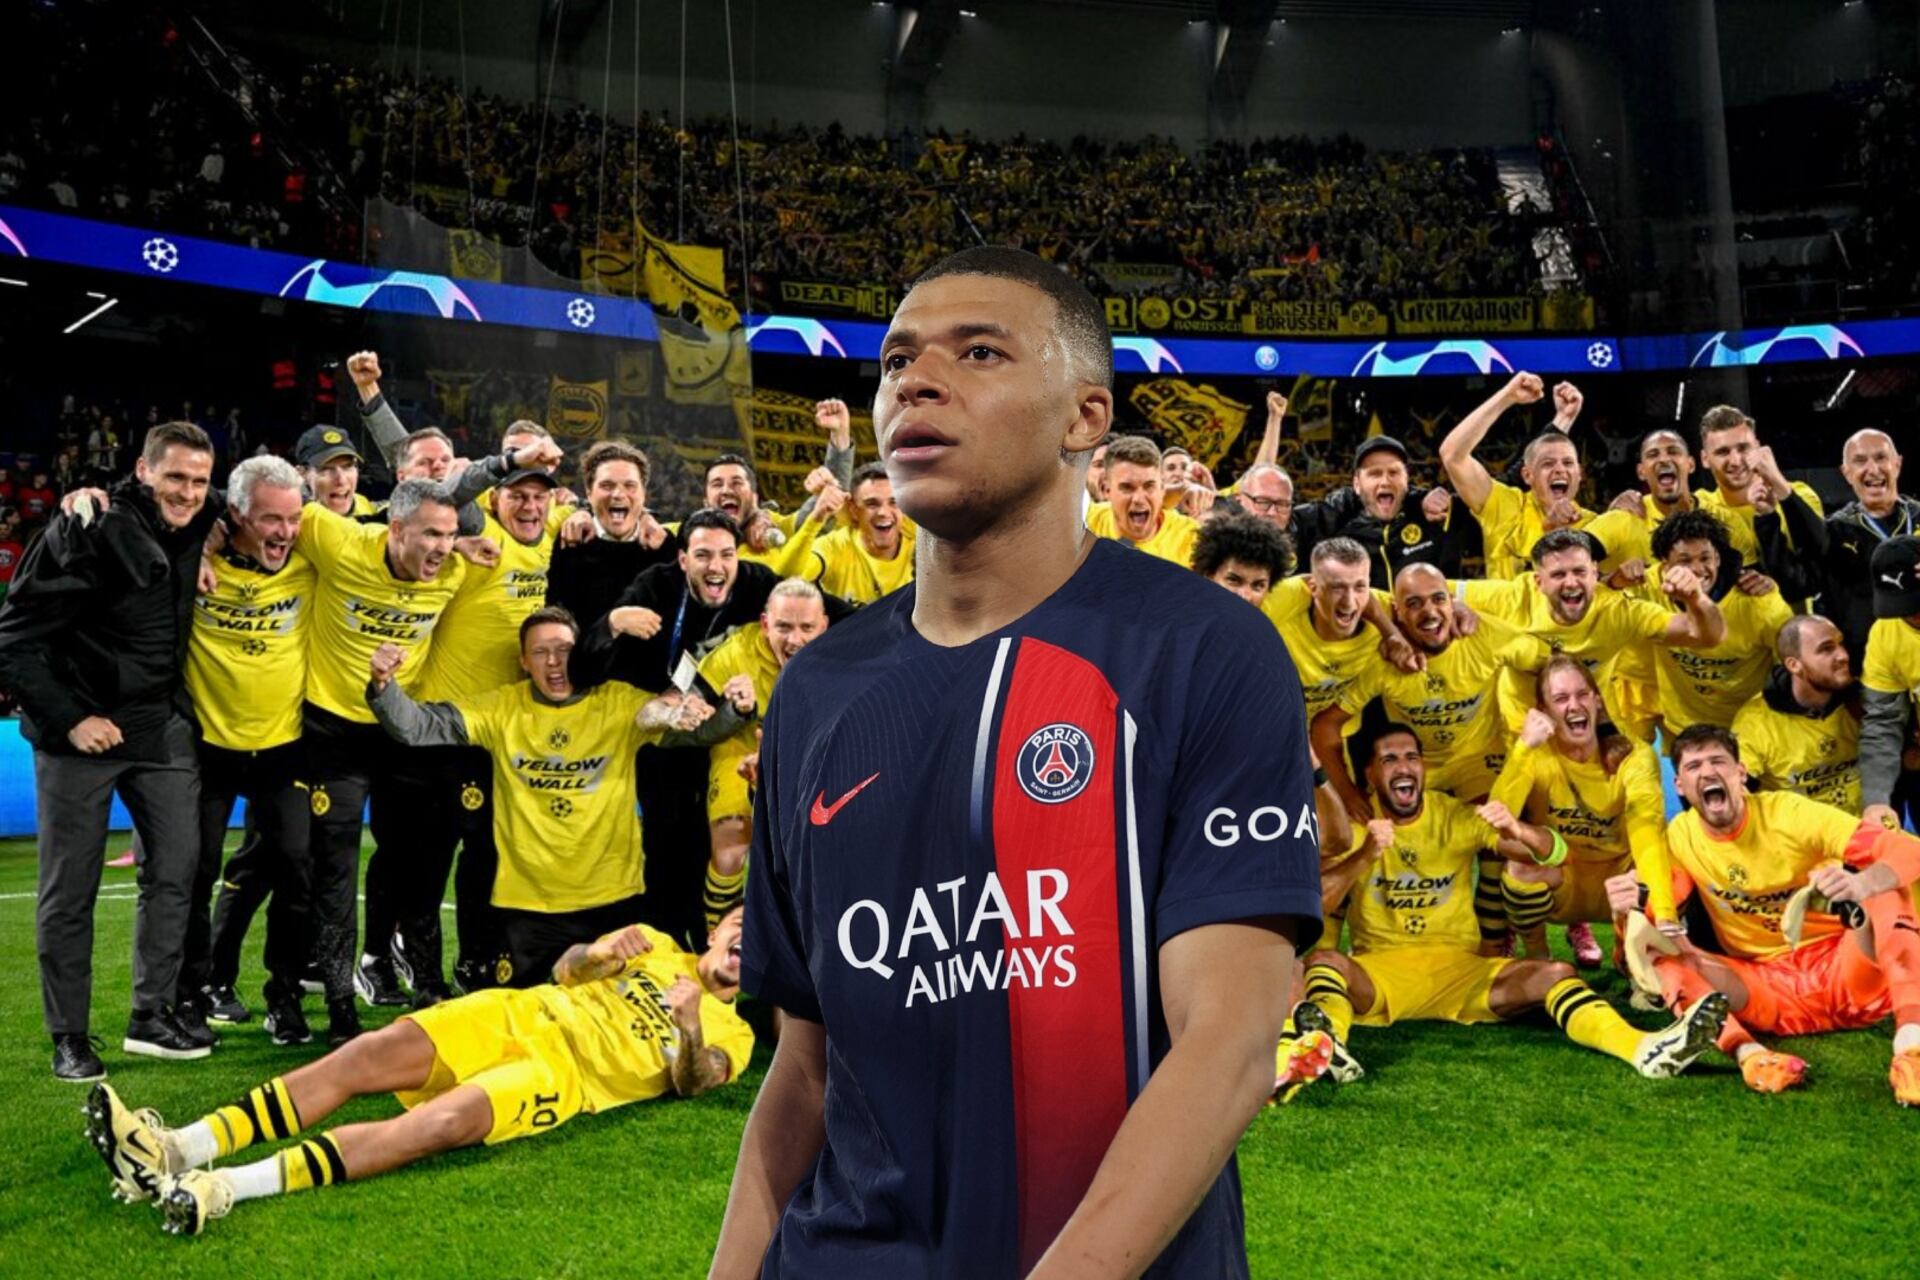 More than $2BN wasted by PSG, Mbappé says bye to Champions League and probably Paris while Dortmund is in the UCL final